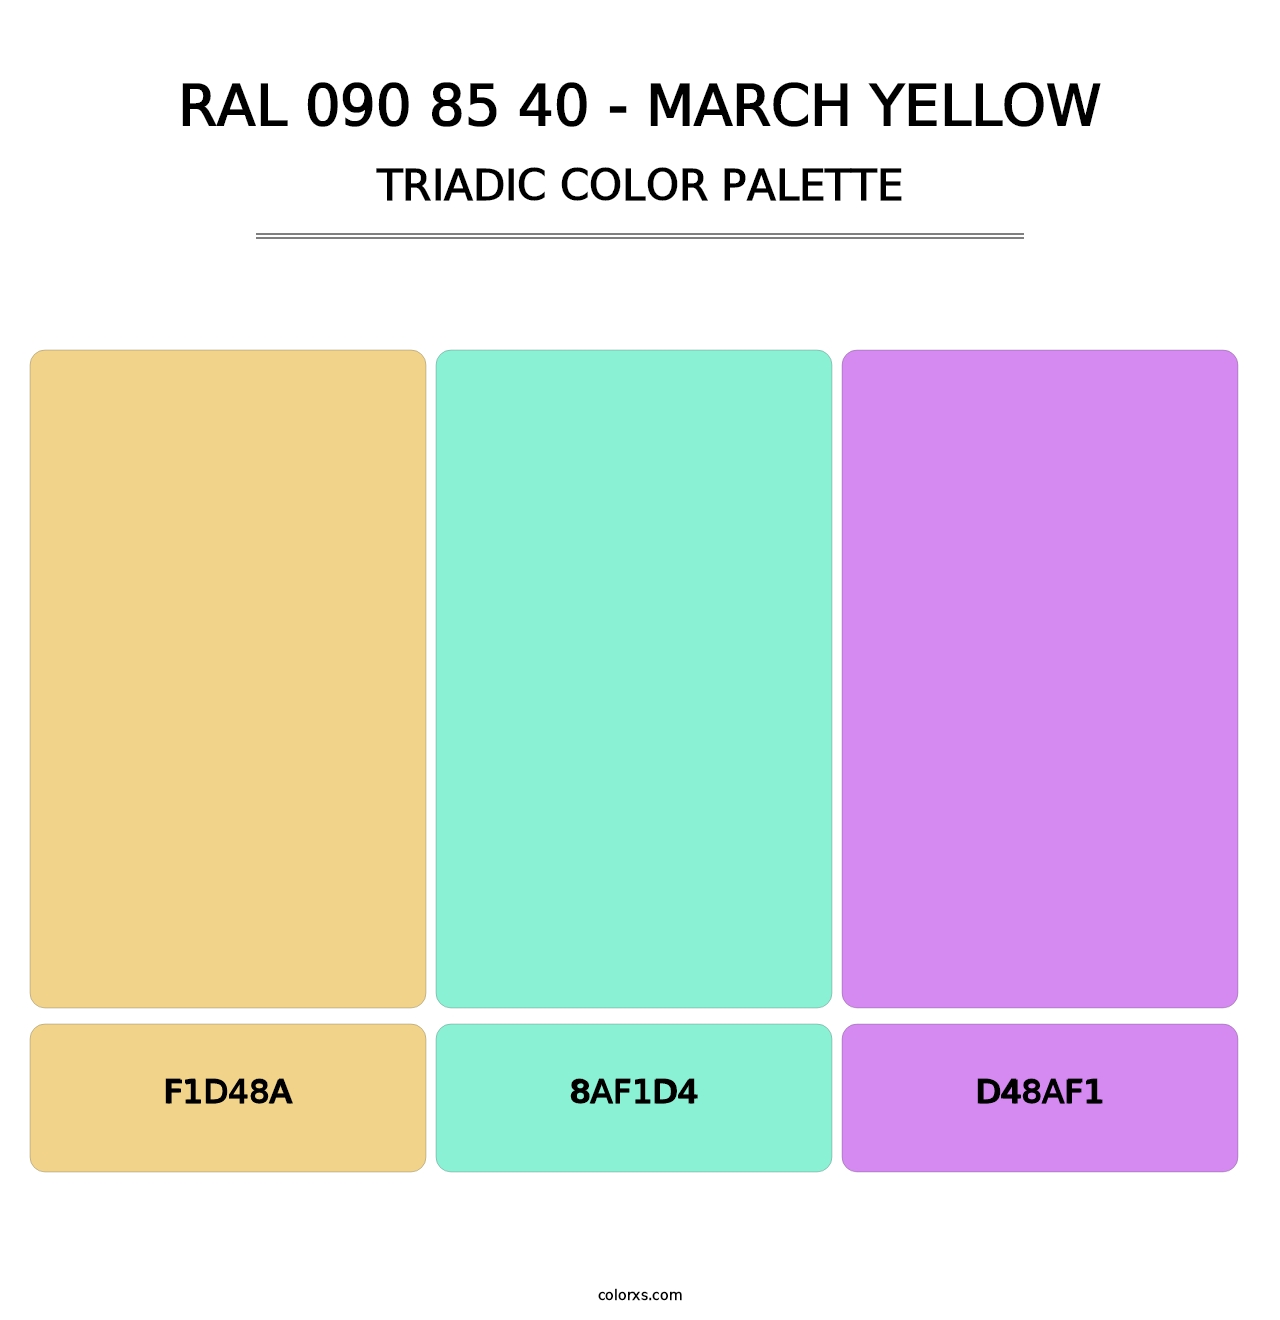 RAL 090 85 40 - March Yellow - Triadic Color Palette